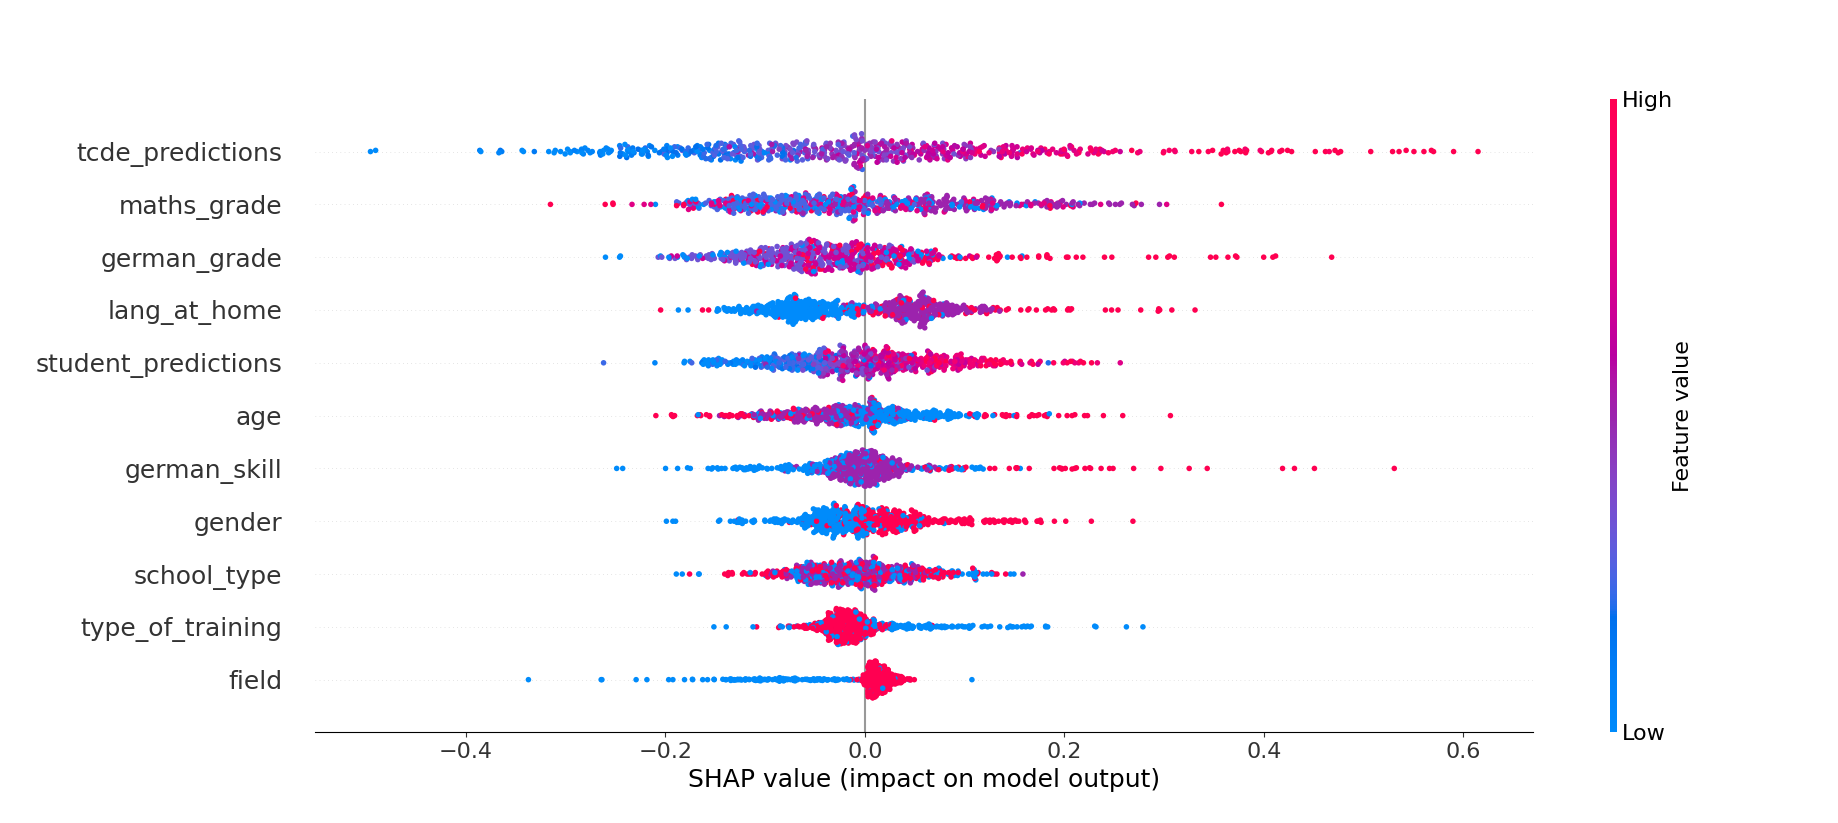 This image is a scatter plot, illustrating the influence of various features on a model's output, with SHAP values plotted on the horizontal axis ranging from -0.4 to +0.6. This representation provides insights into how individual feature values are affecting the model's predictions.